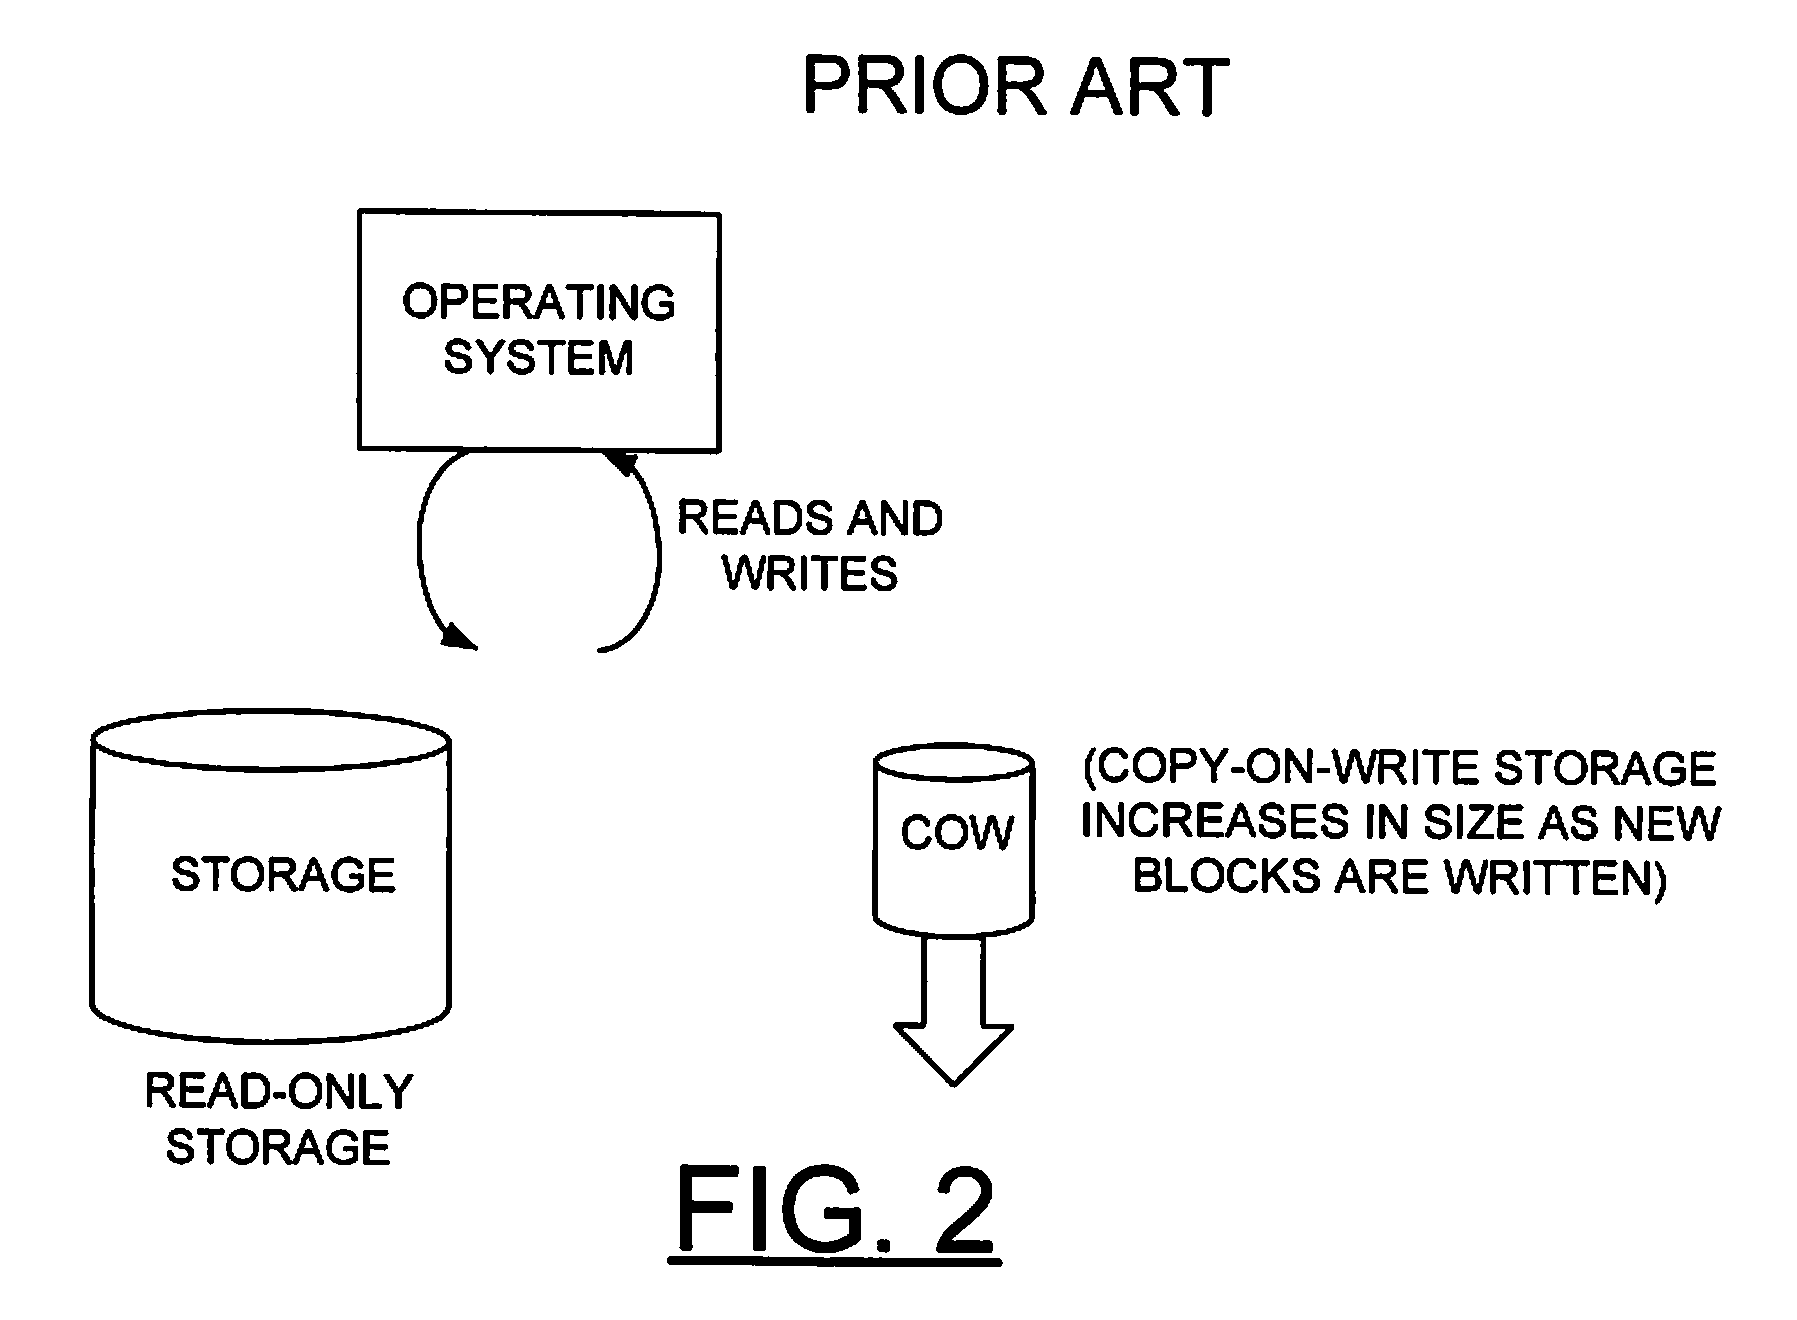 Method and apparatus for implementing dynamic copy-on-write (COW) storage compression through purge function